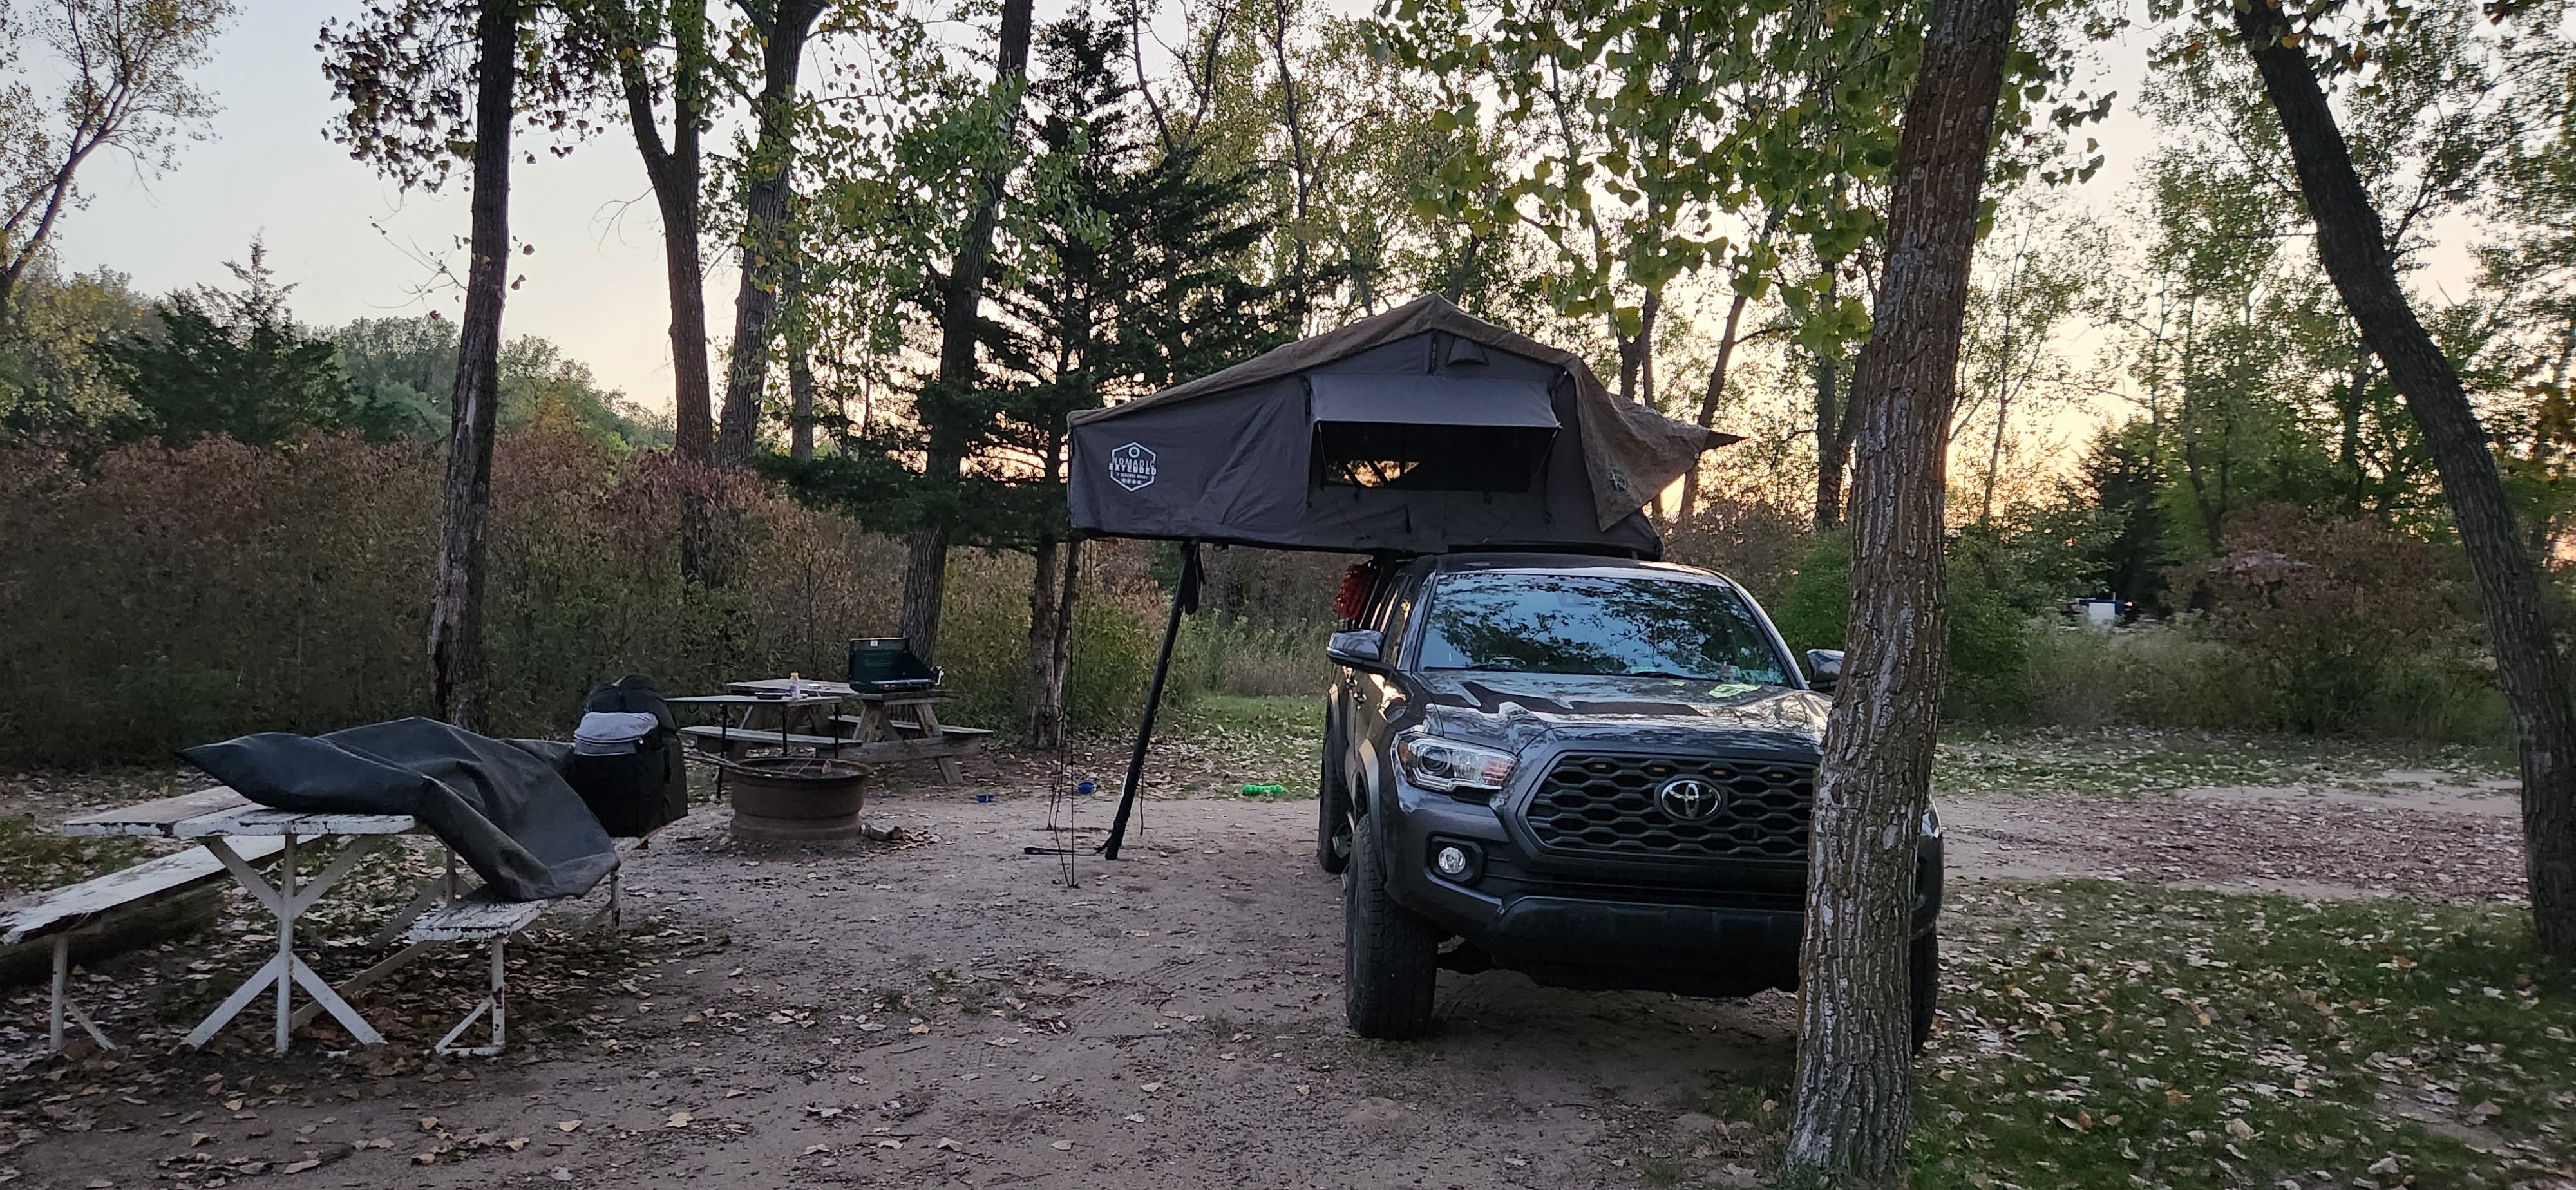 Camper submitted image from Colfax Quarry Springs Park - 1